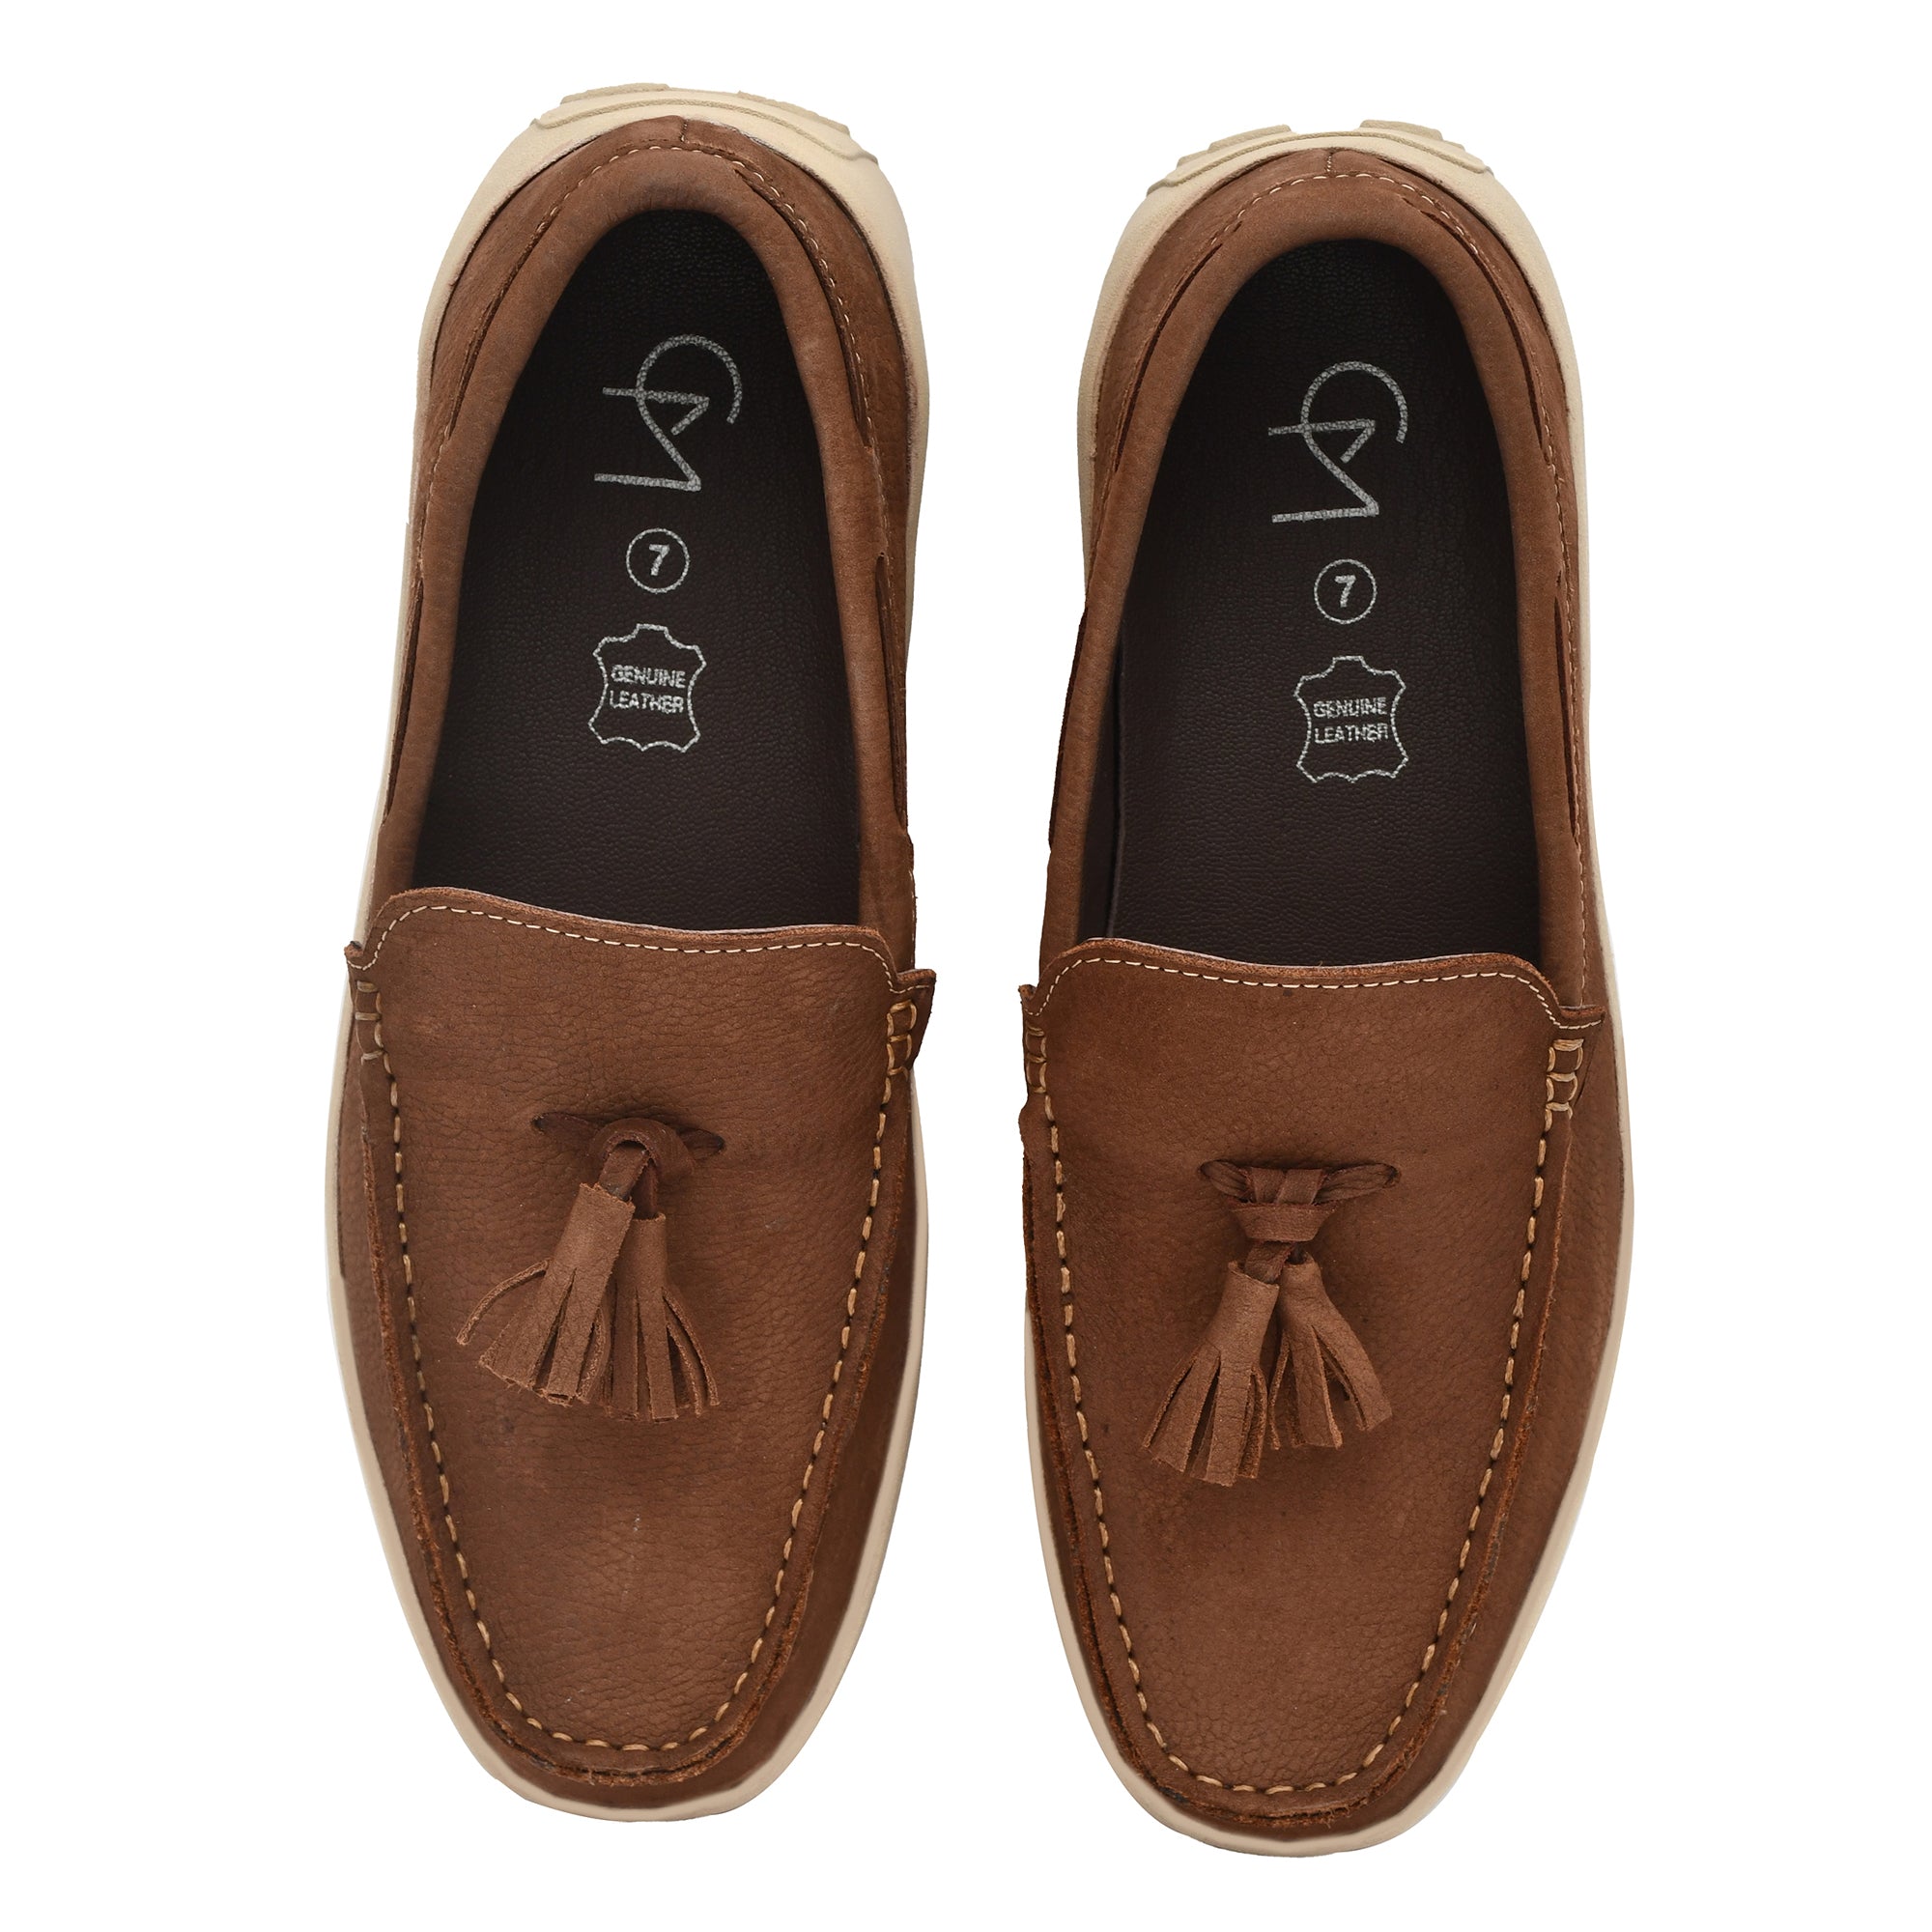 Leather Loafers for men's